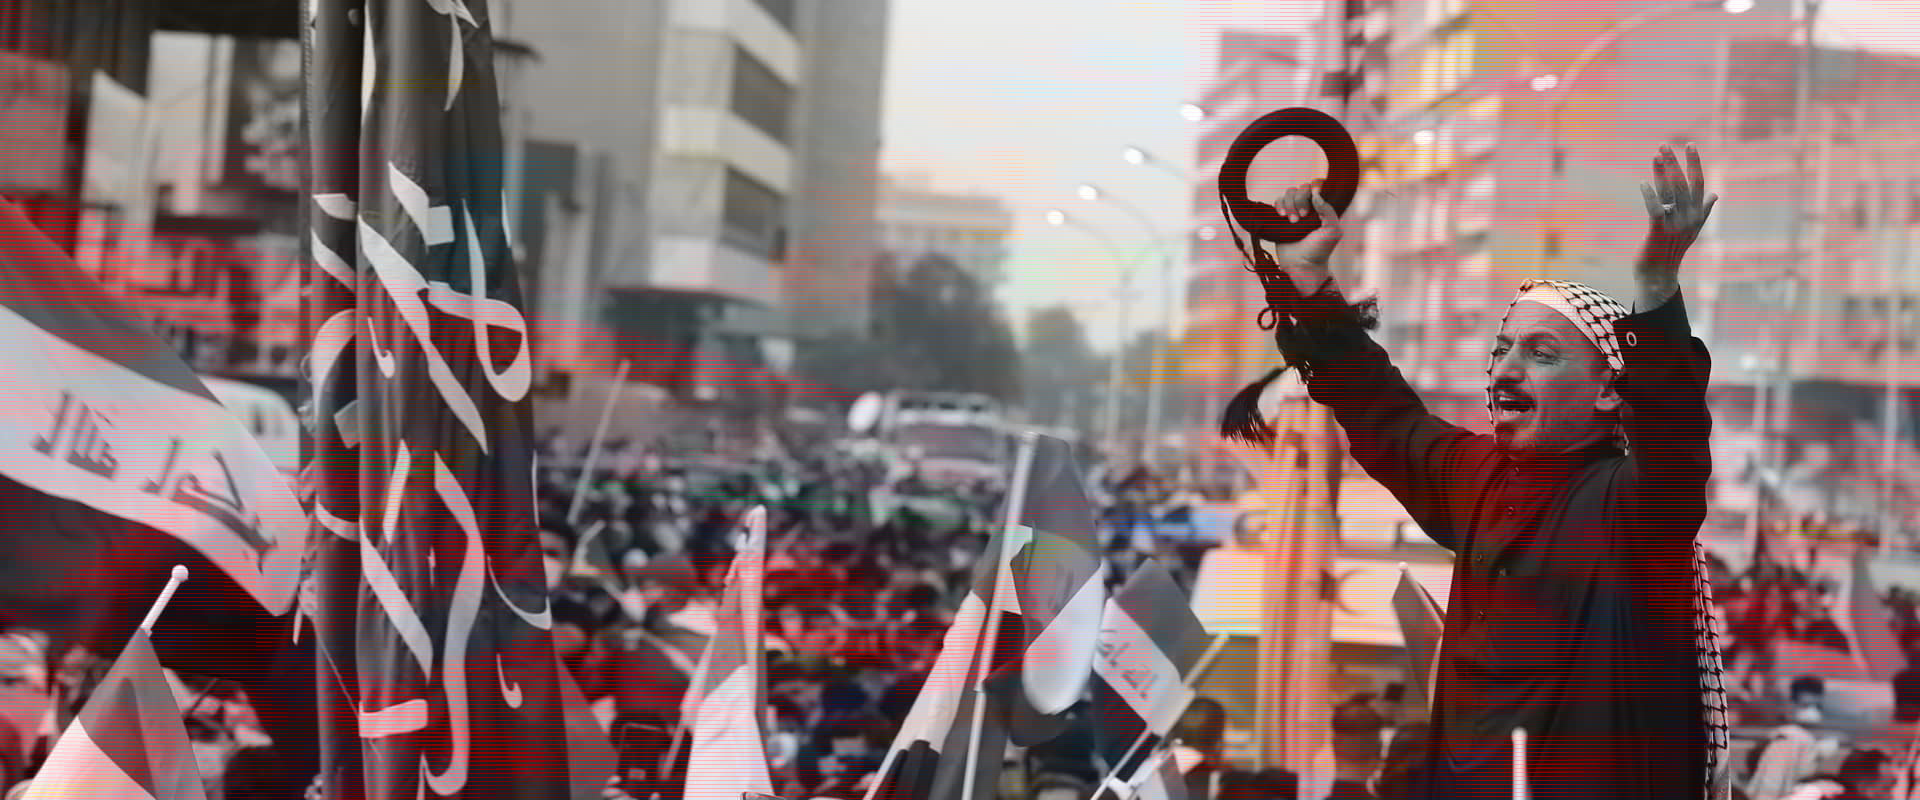 Protests in Iraq that prompted the government to cut internet access